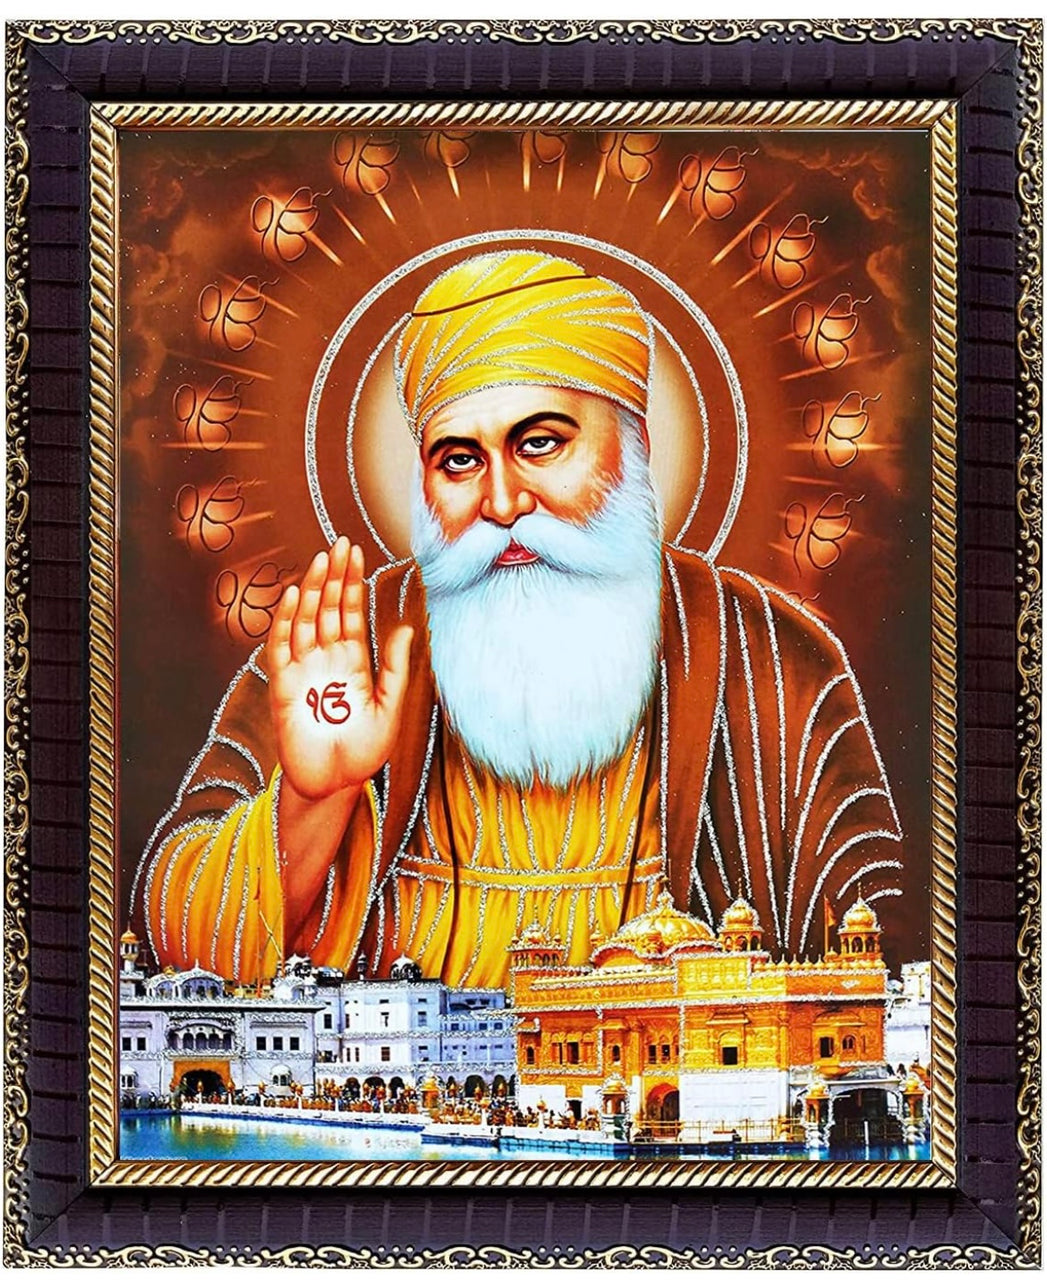 Guru Nanak dev ji with Golden temple Giving Blessing Photo Frame for Wall Hanging/Gift/Temple/puja Room/Home Decor Golden design Frame with unbreakable Acrylic glass for Worship